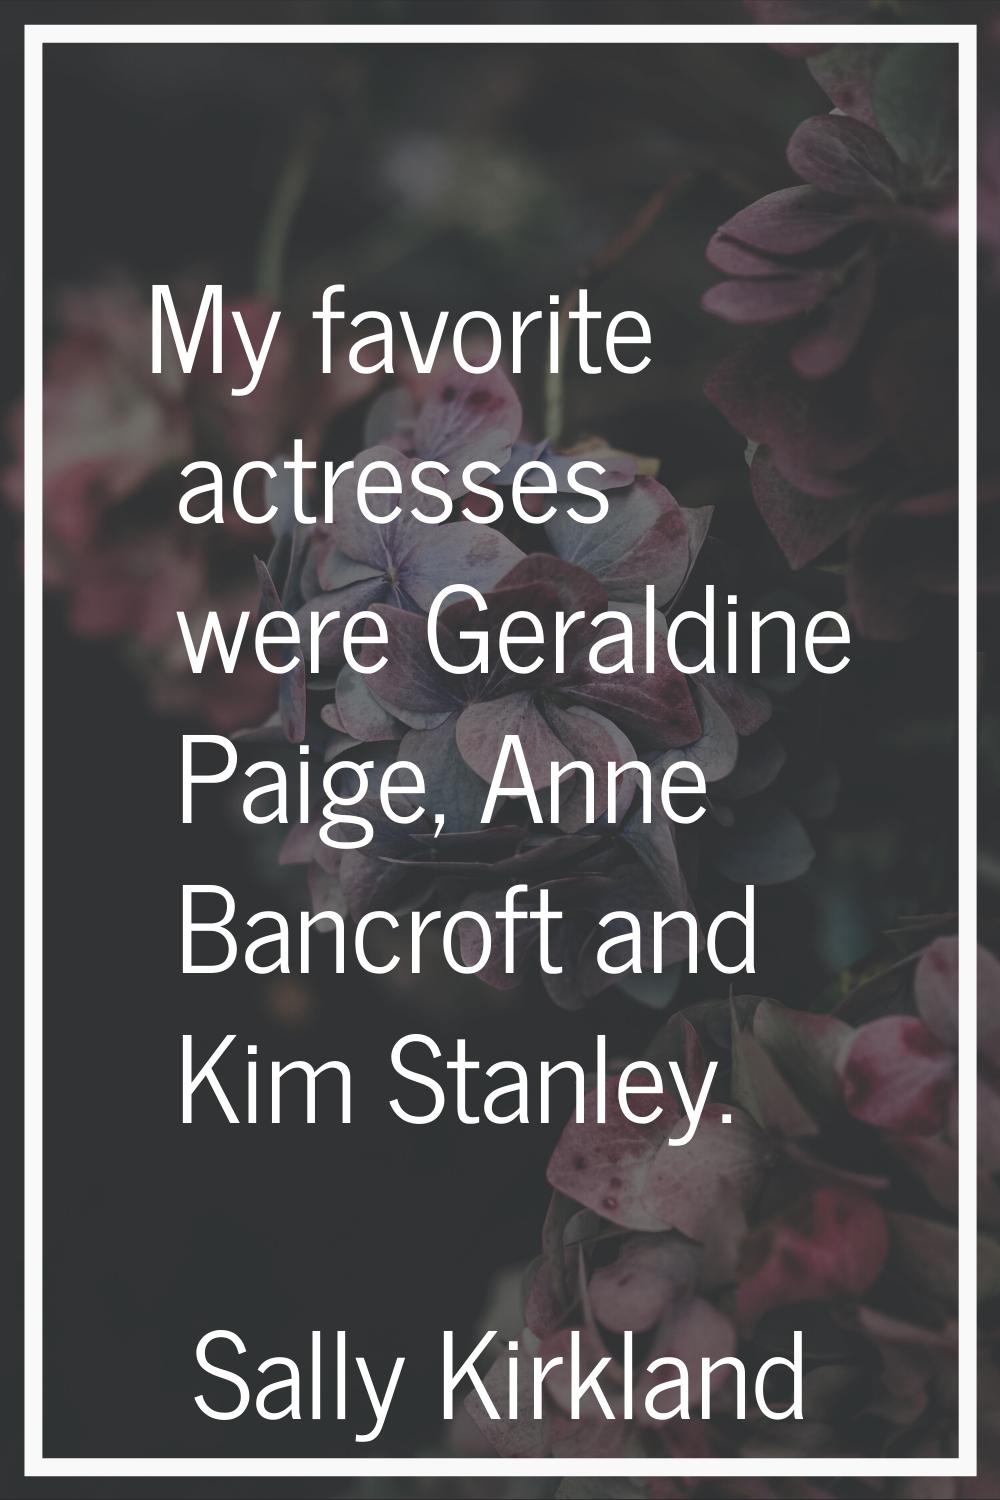 My favorite actresses were Geraldine Paige, Anne Bancroft and Kim Stanley.